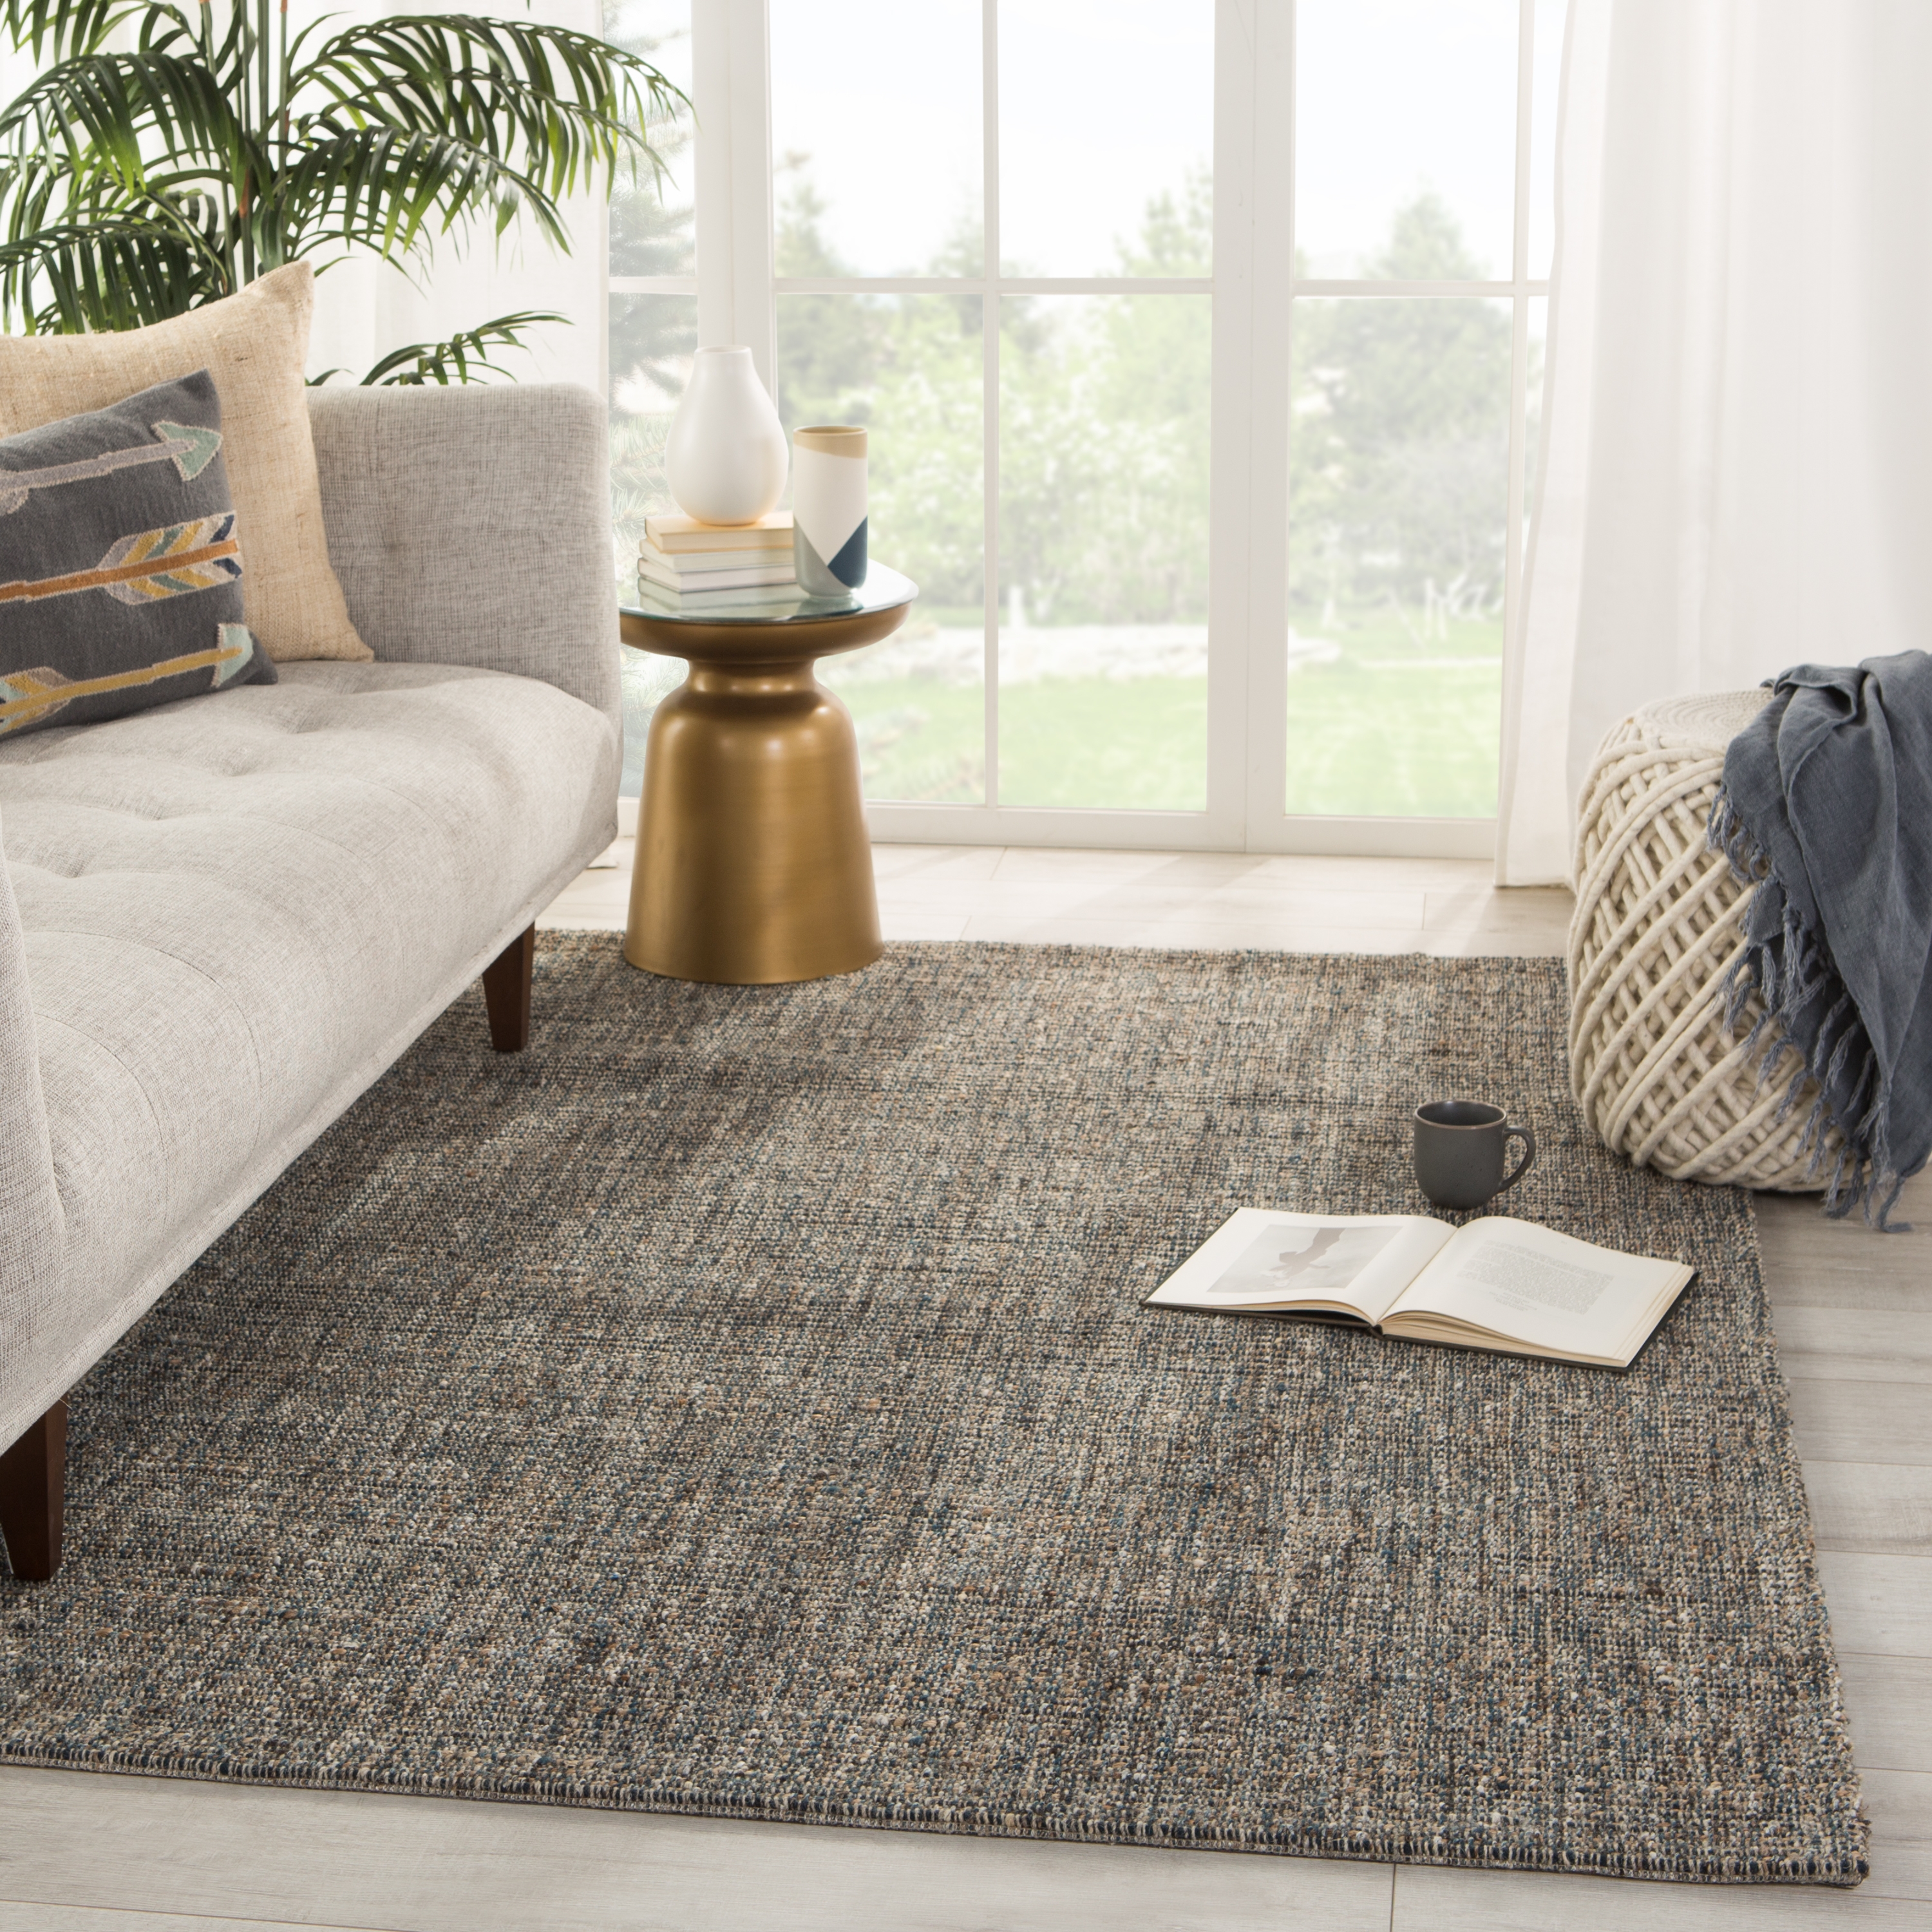 Sutton Natural Solid Gray/ Blue Area Rug (2'X3') - Image 4